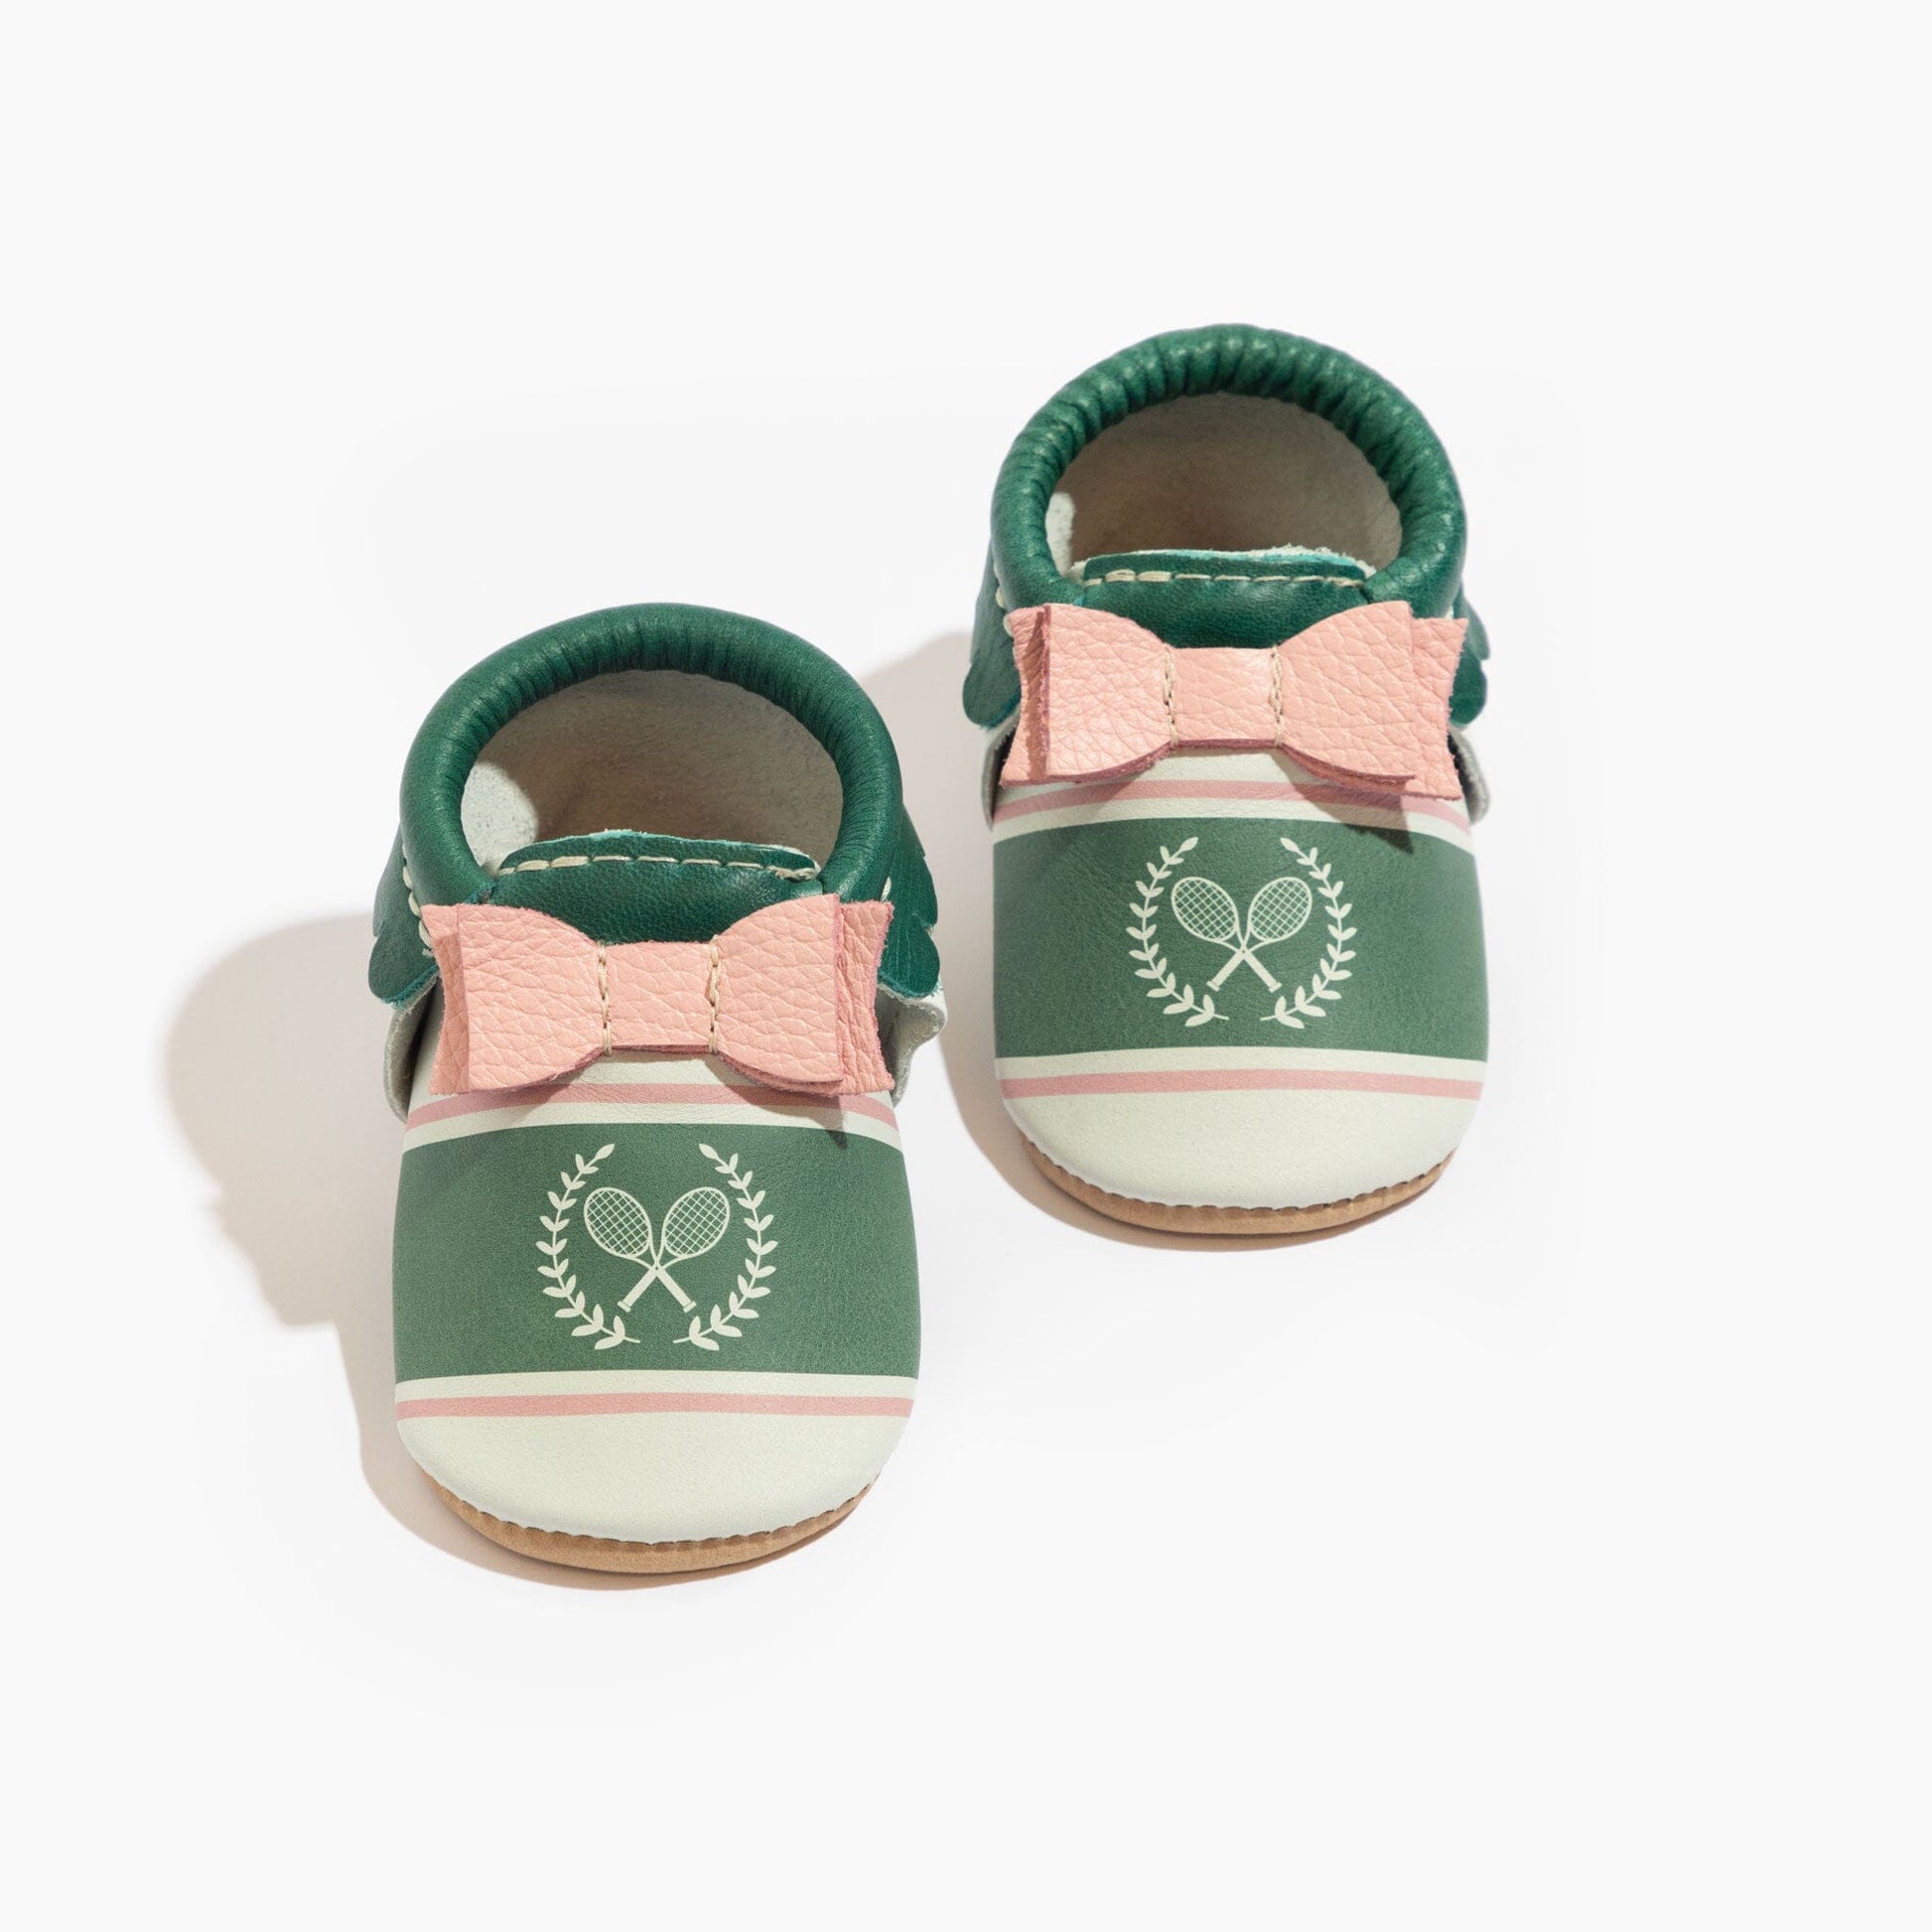 Country Club Bow Baby Shoe Bow Mocc Soft Sole 